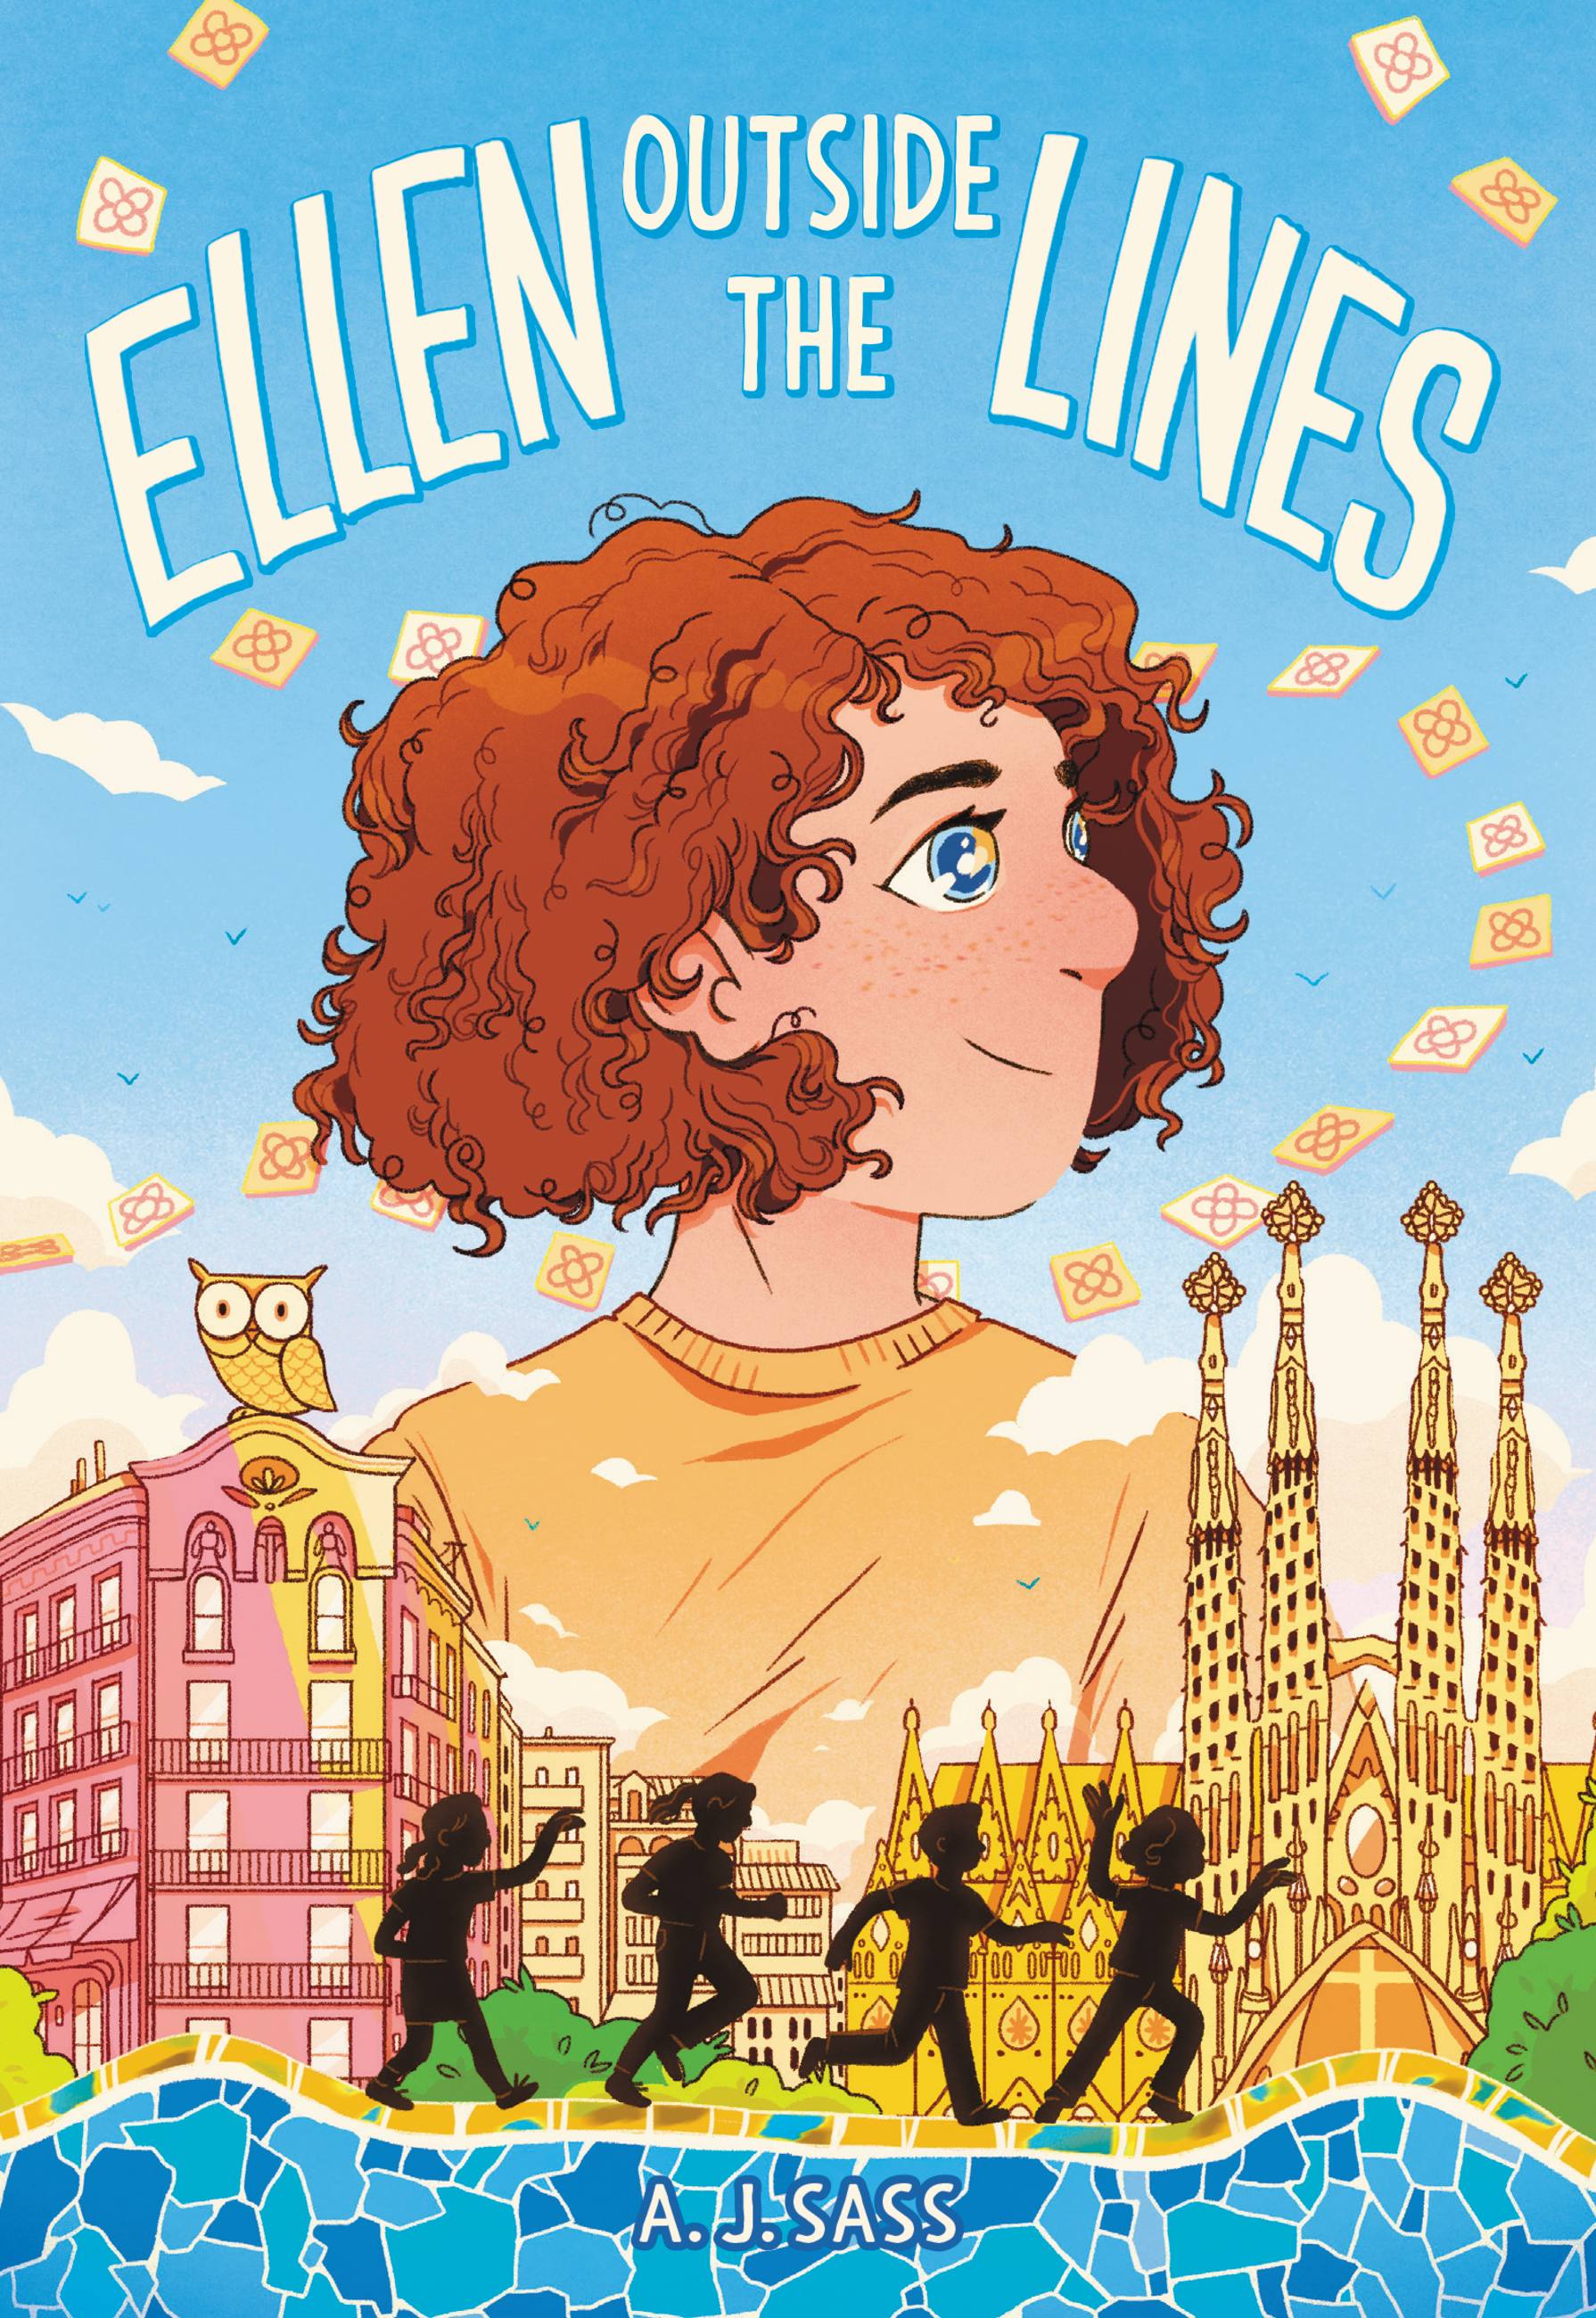 Cover Image of Ellen Outside the Lines